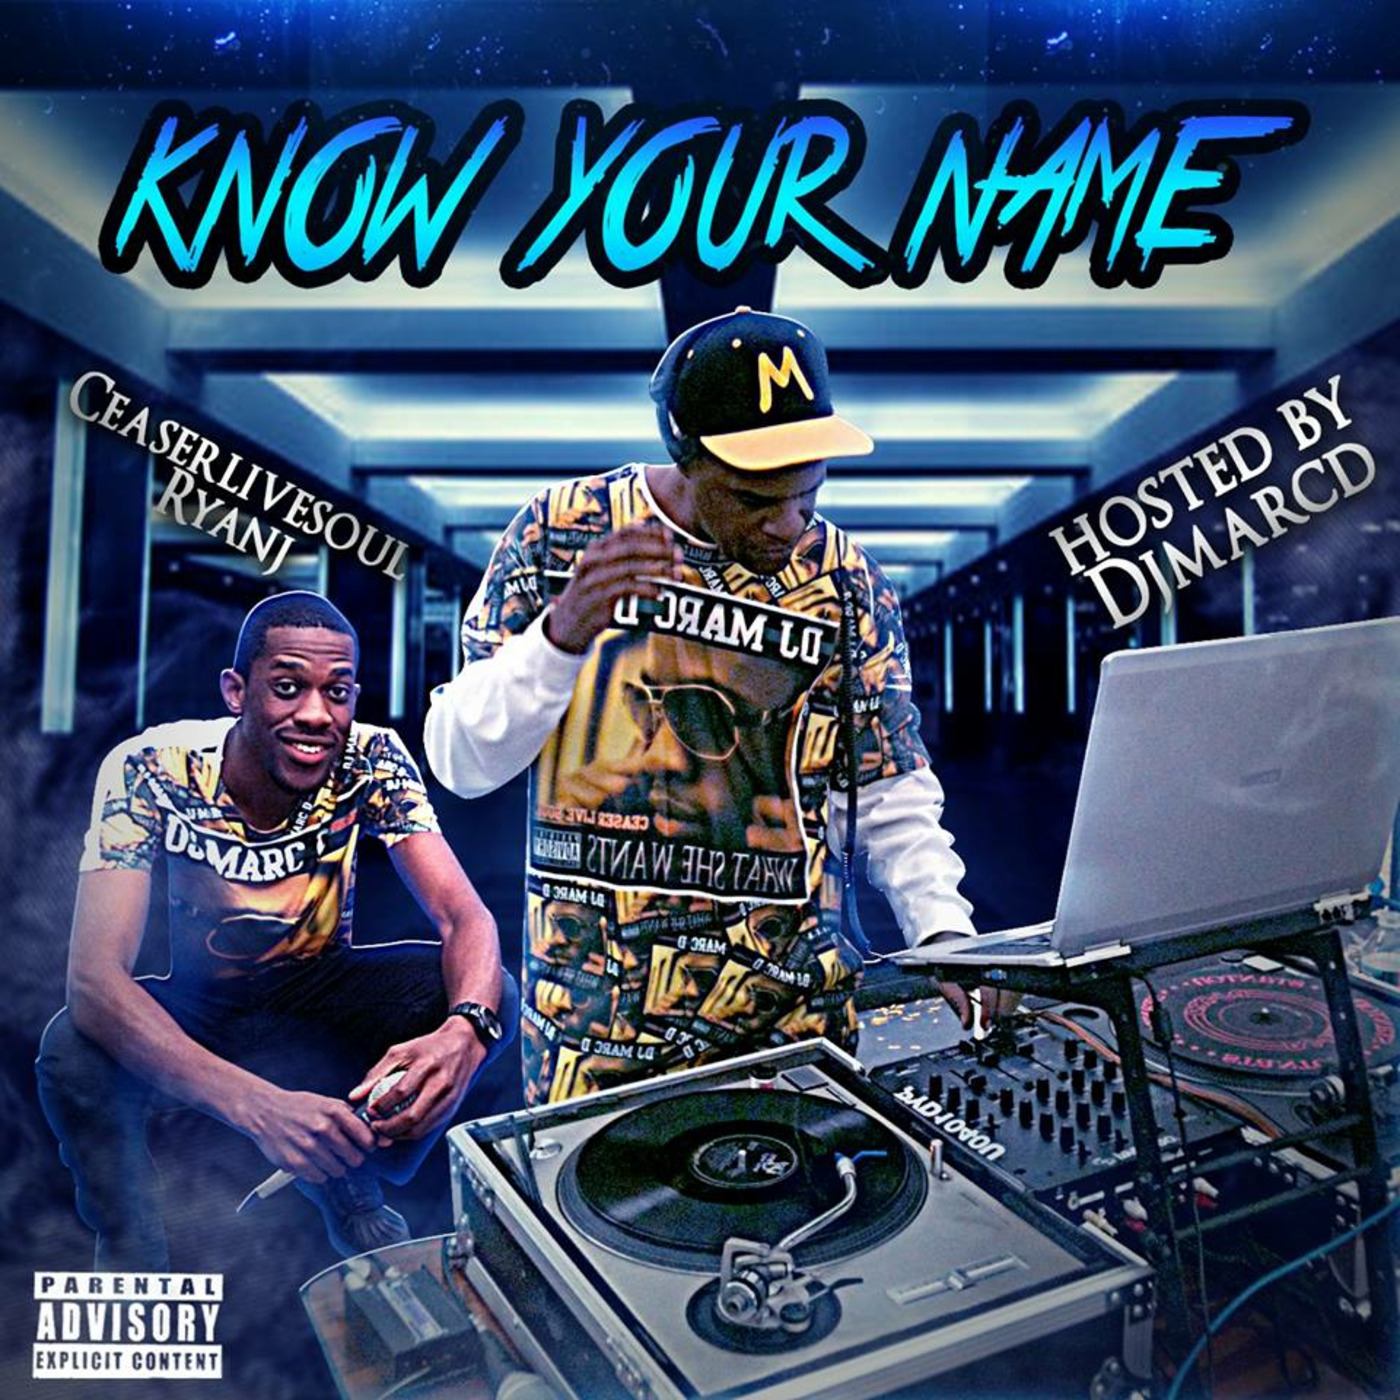 #Rnb #Hiphop #Rap #Soul @Djmarcd Ft @Ceaserlivesoul And #RyanJ - Know Your Name 30 Minute #Mixtapes #Downloads #InTheMix